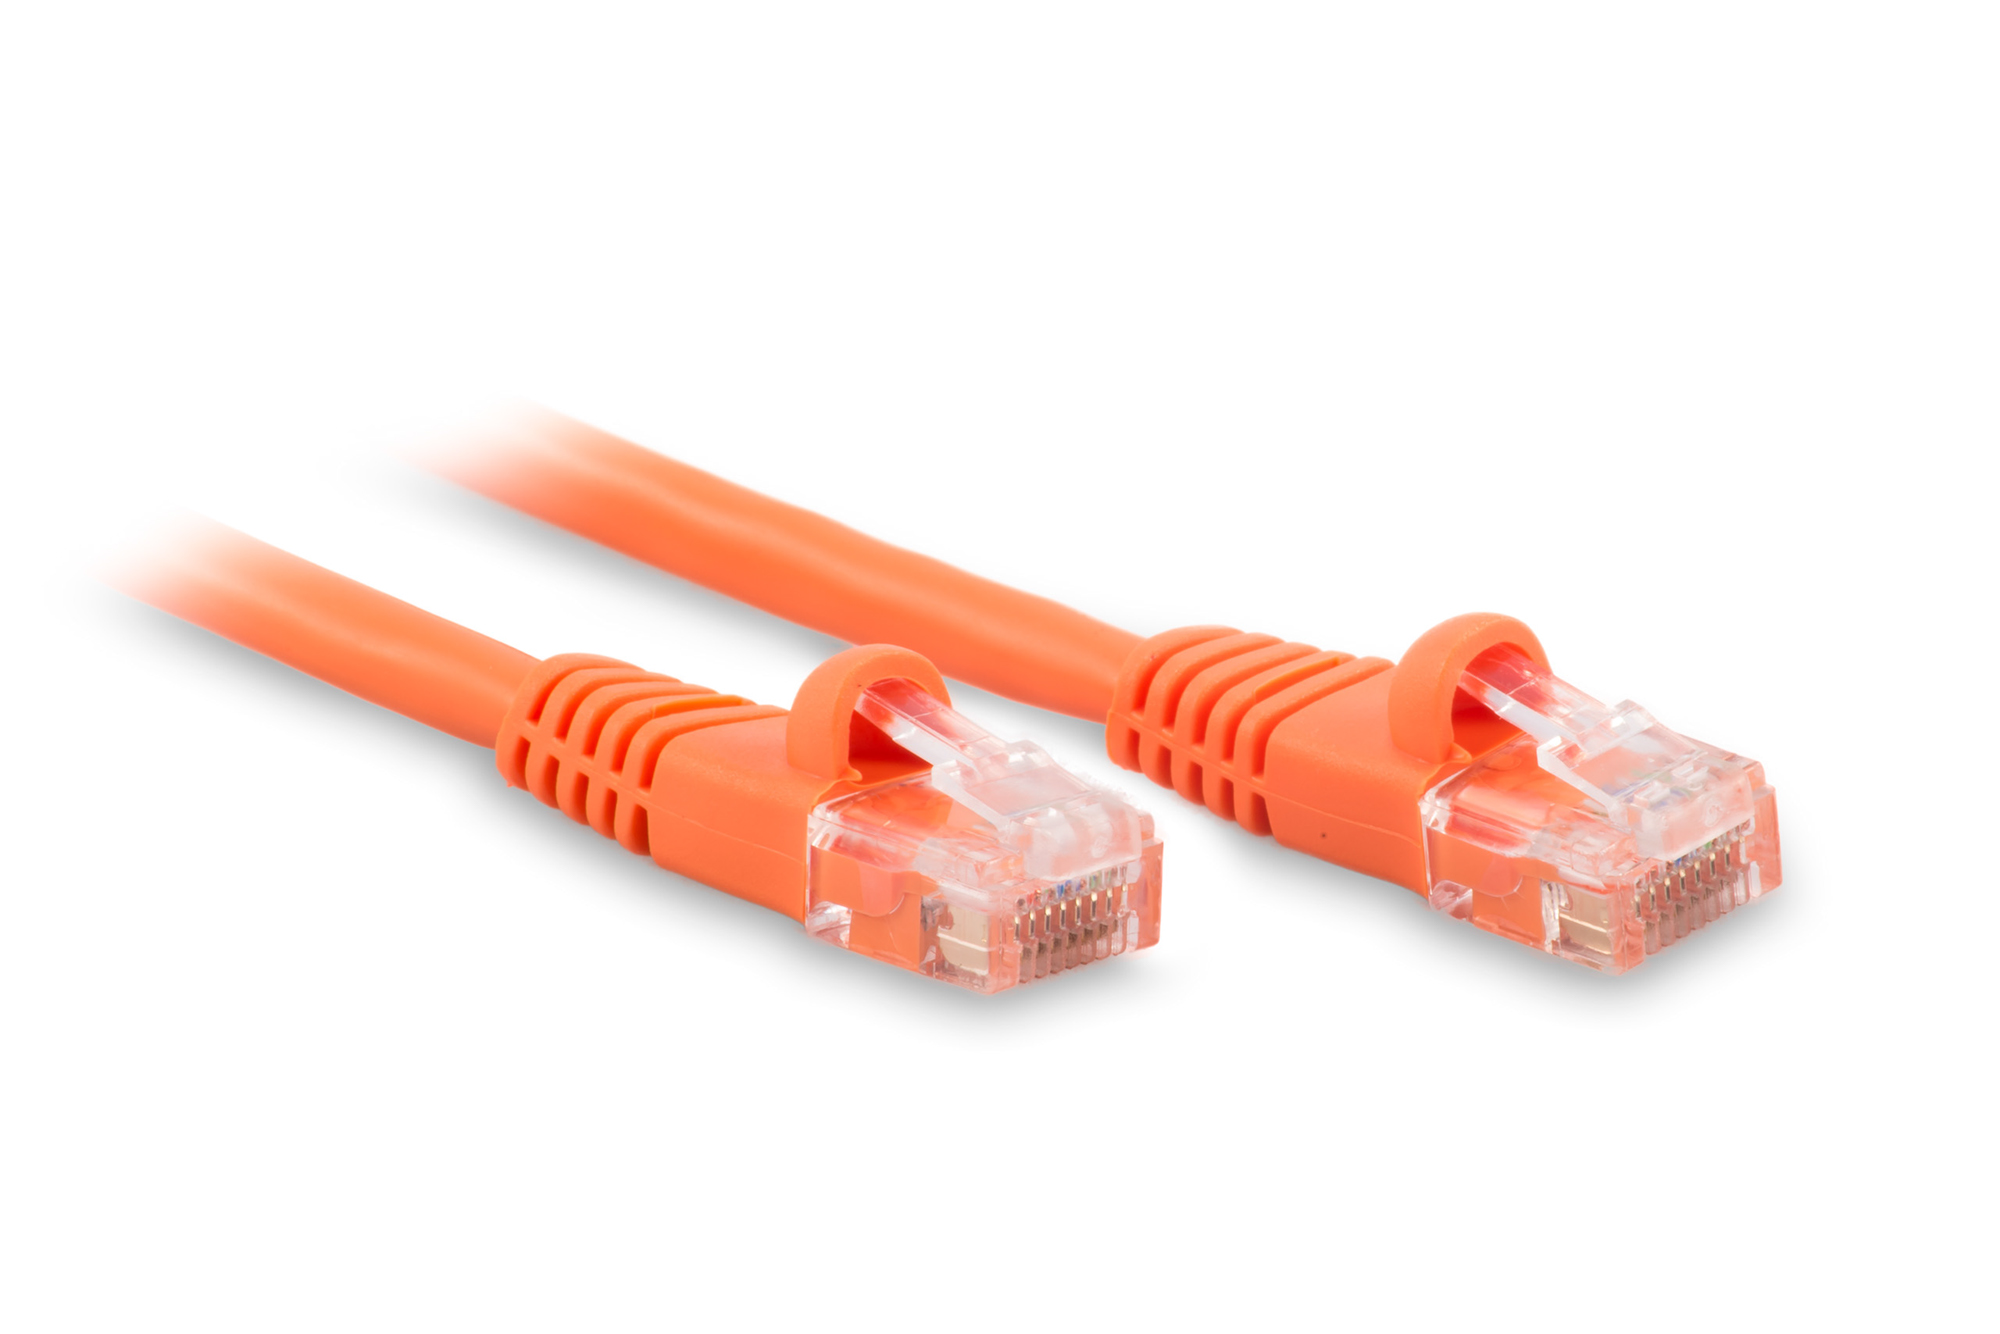 10ft Cat6 Ethernet Patch Cable - Orange Color - Snagless Boot